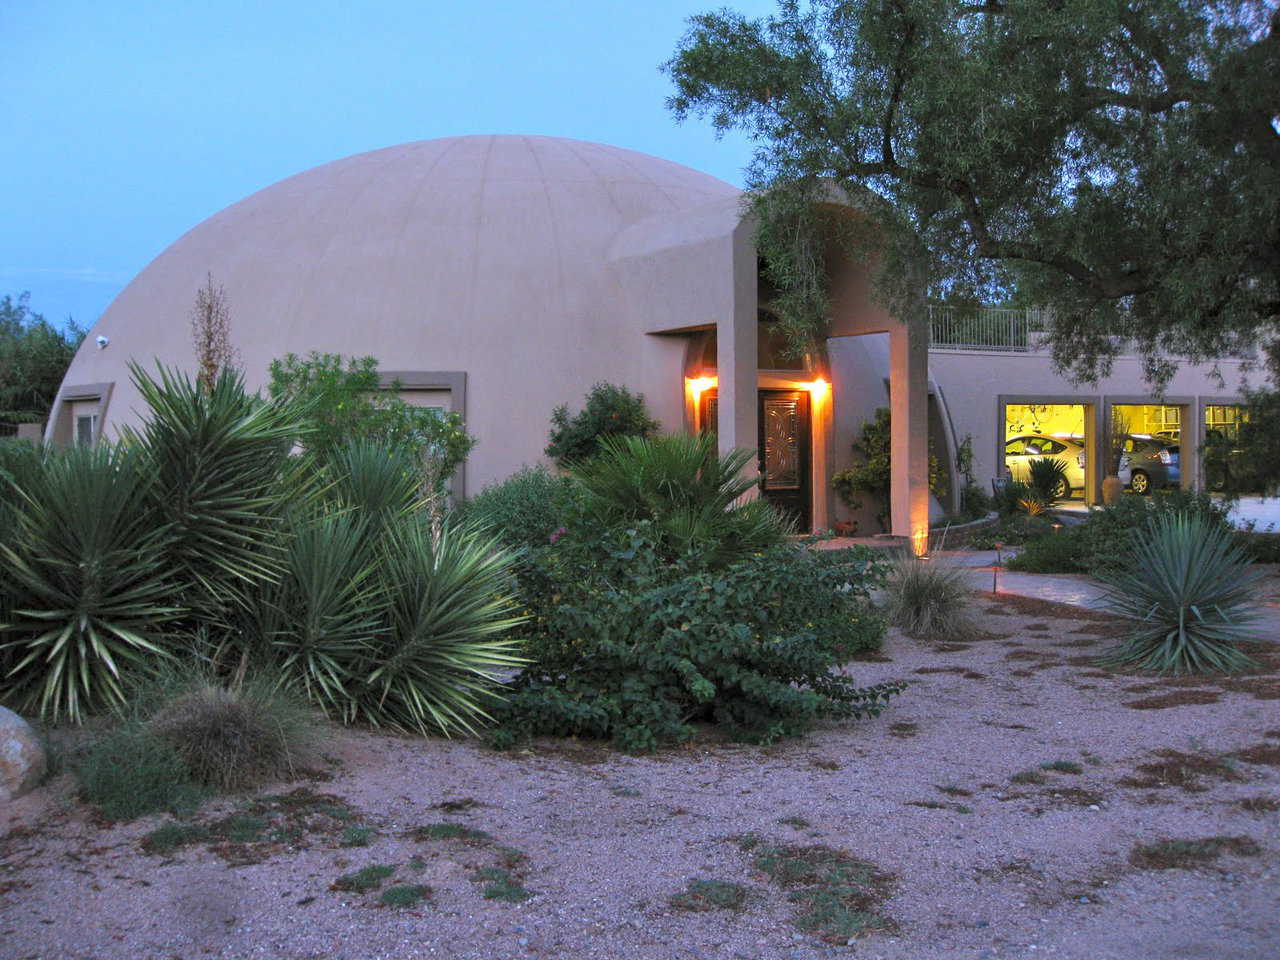 Stout Residence in Mesa, AZ – Carol and Roger Stout planned their fabulous Monolithic Dome home for five years.